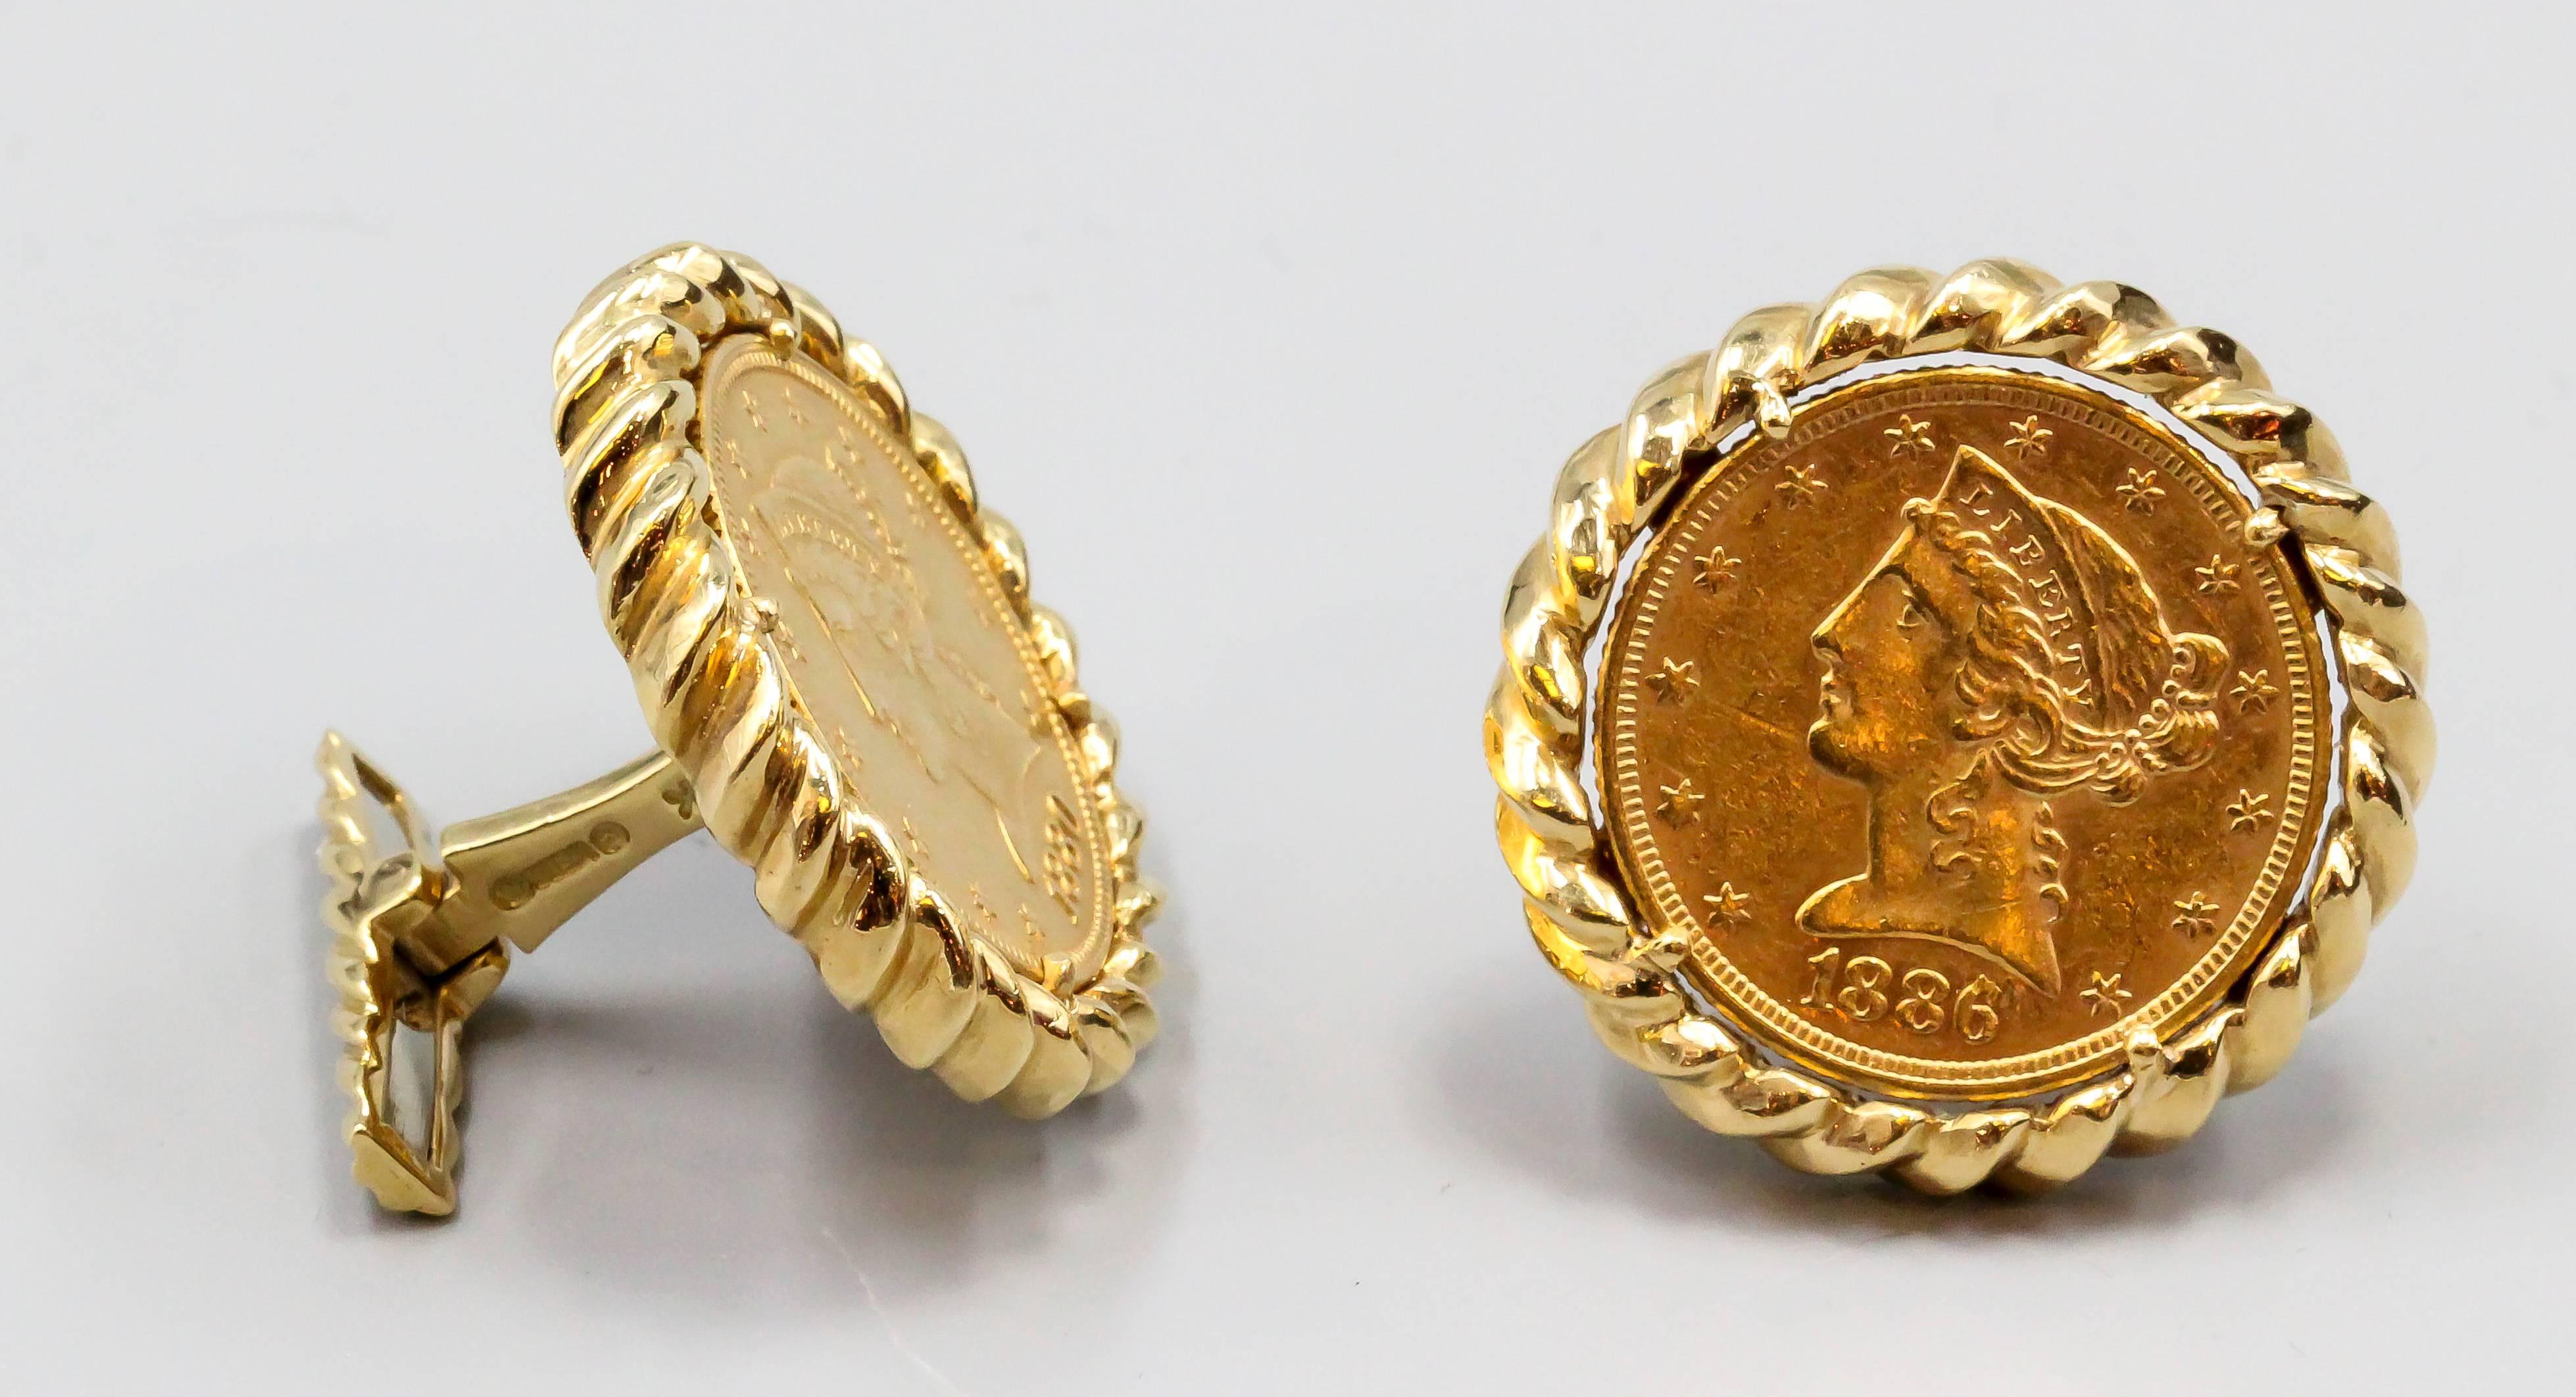 Handsome 18K yellow gold coin cufflinks by David Webb. They feature 1880s $5 Liberty Head coins, one date 1880, the other 1886. Both in superb condition, mounted on a twisted rope style setting. Beautifully made and highly collectible.

Hallmarks: